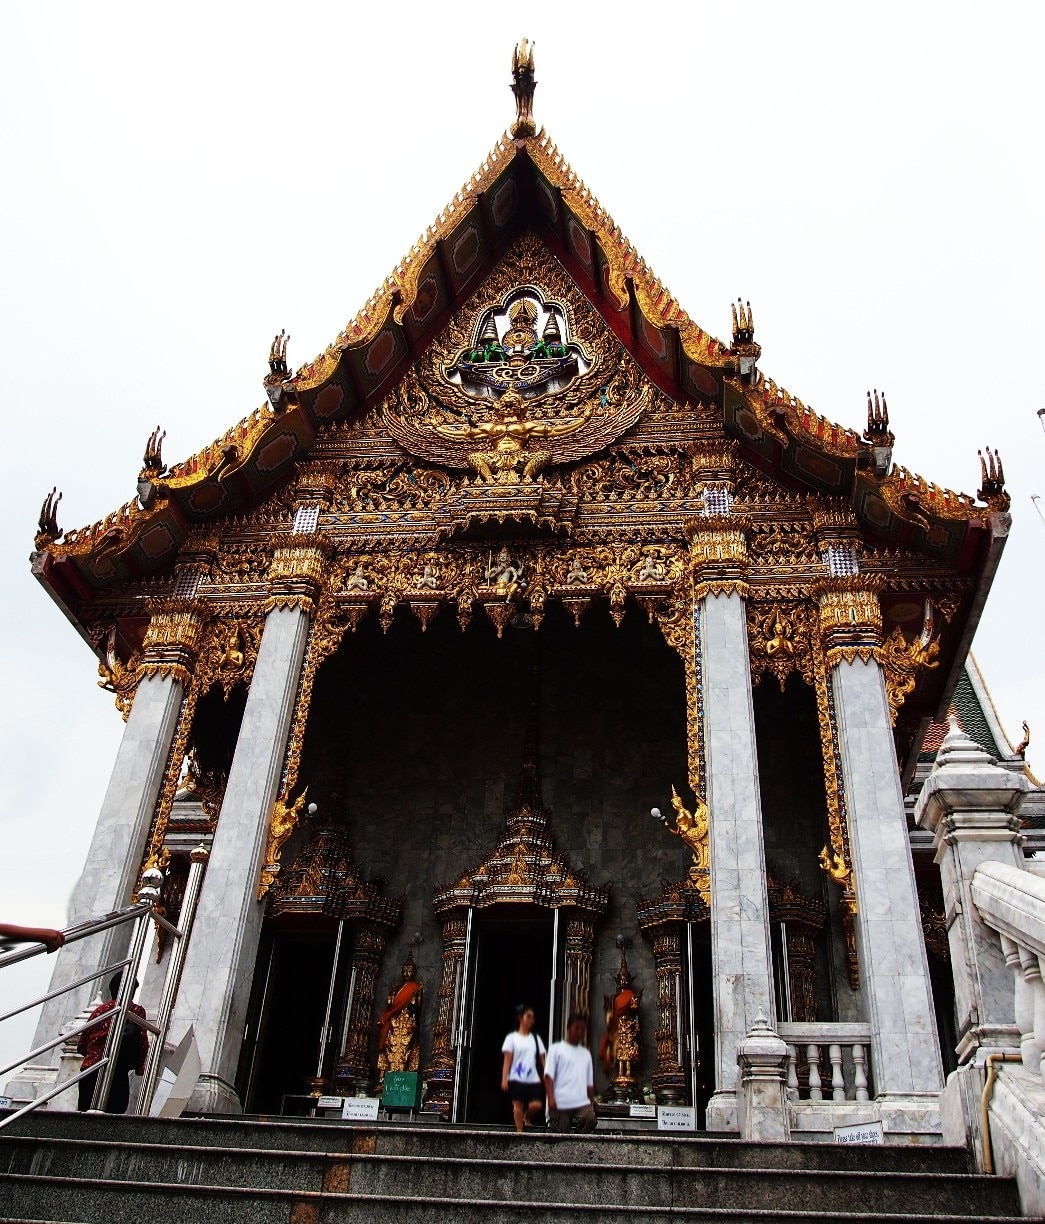 Entrance to a temple in Bangkok. It consist of too much detailed craftsmanship and architecture. I always enjoy these kind of constructions in Thailand. #Temple